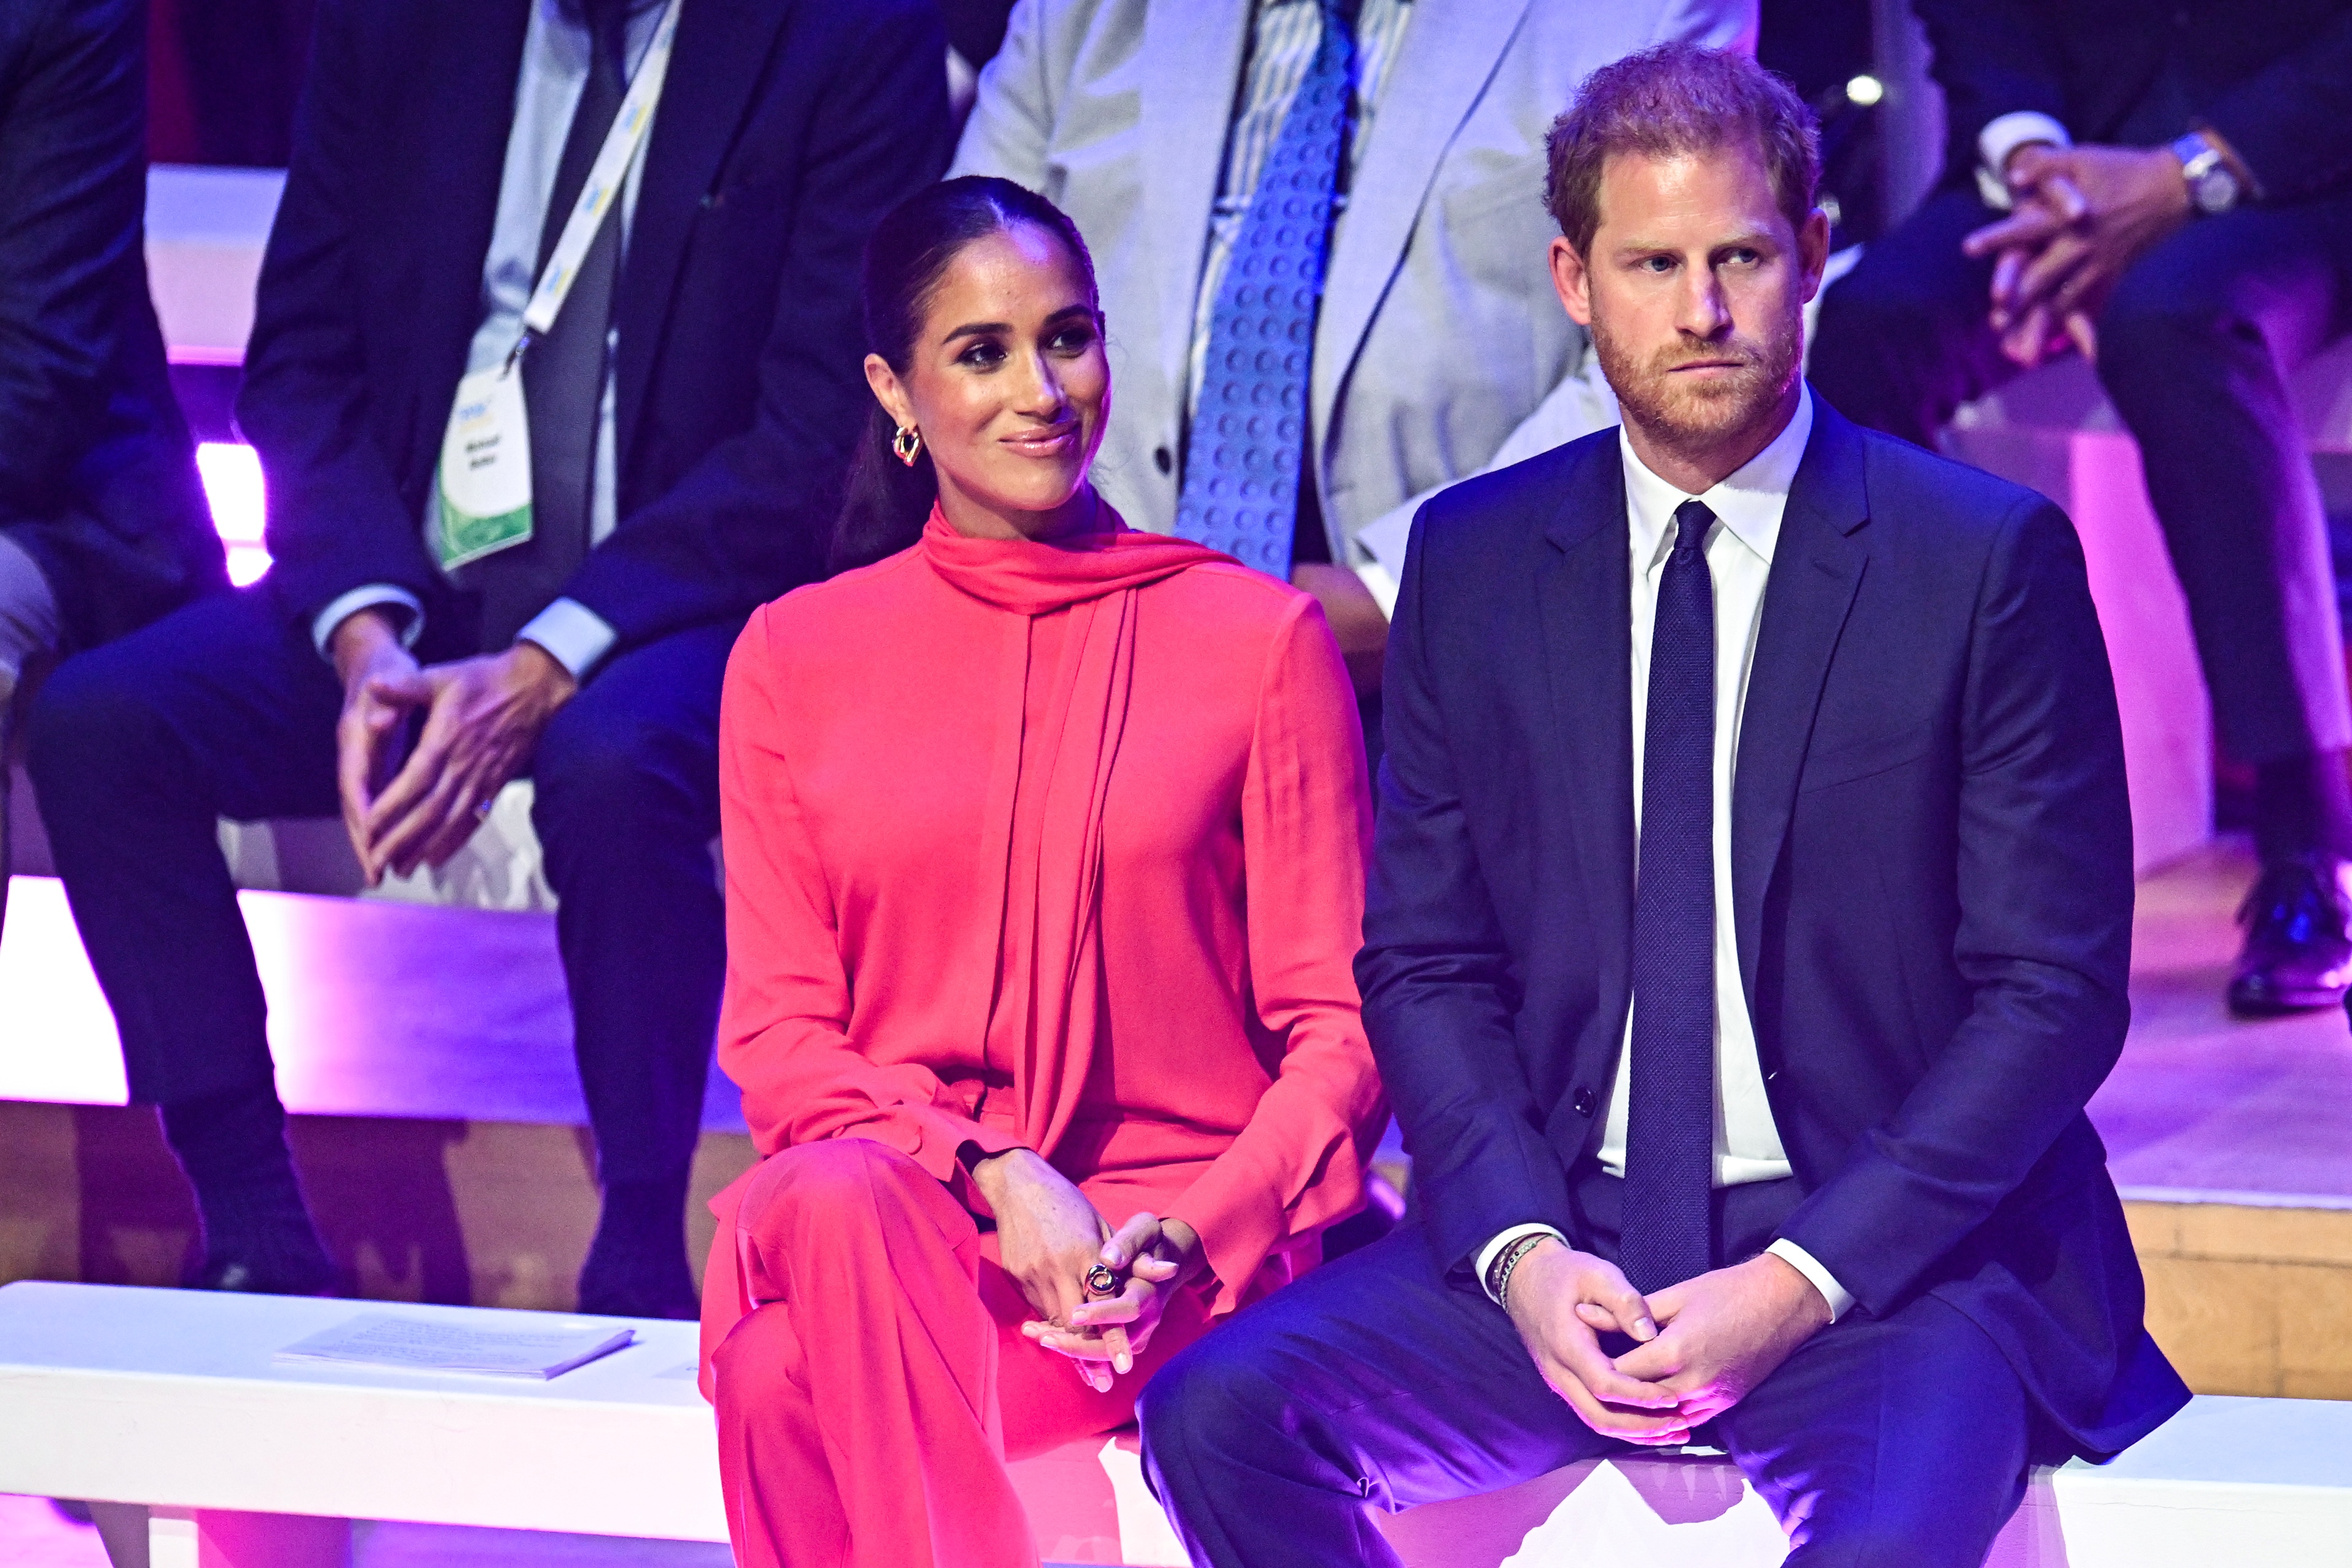 Britain's Meghan, Duchess of Sussex (L) and Britain's Prince Harry, Duke of Sussex, attend the annual One Young World Summit at Bridgewater Hall in Manchester, north-west England on September 5, 2022. - The One Young World Summit is a global forum for young leaders, bringing together young people from over 190 countries around the world to come together to confront the biggest challenges facing humanity. (Photo by Oli SCARFF / AFP)